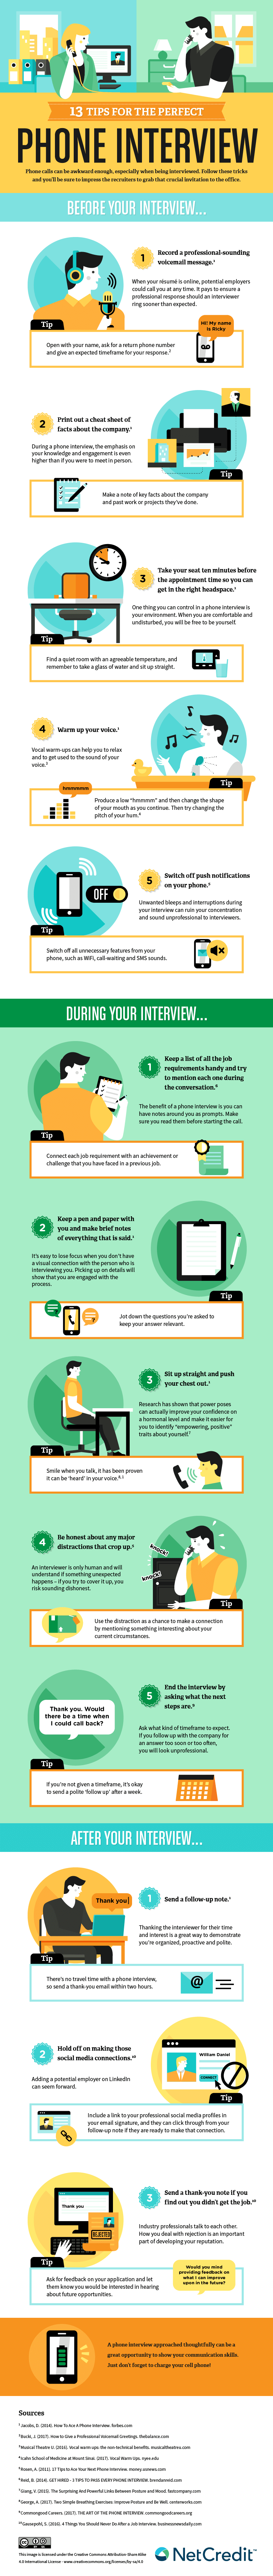 13 Tips for the Perfect Phone Interview - #infographic